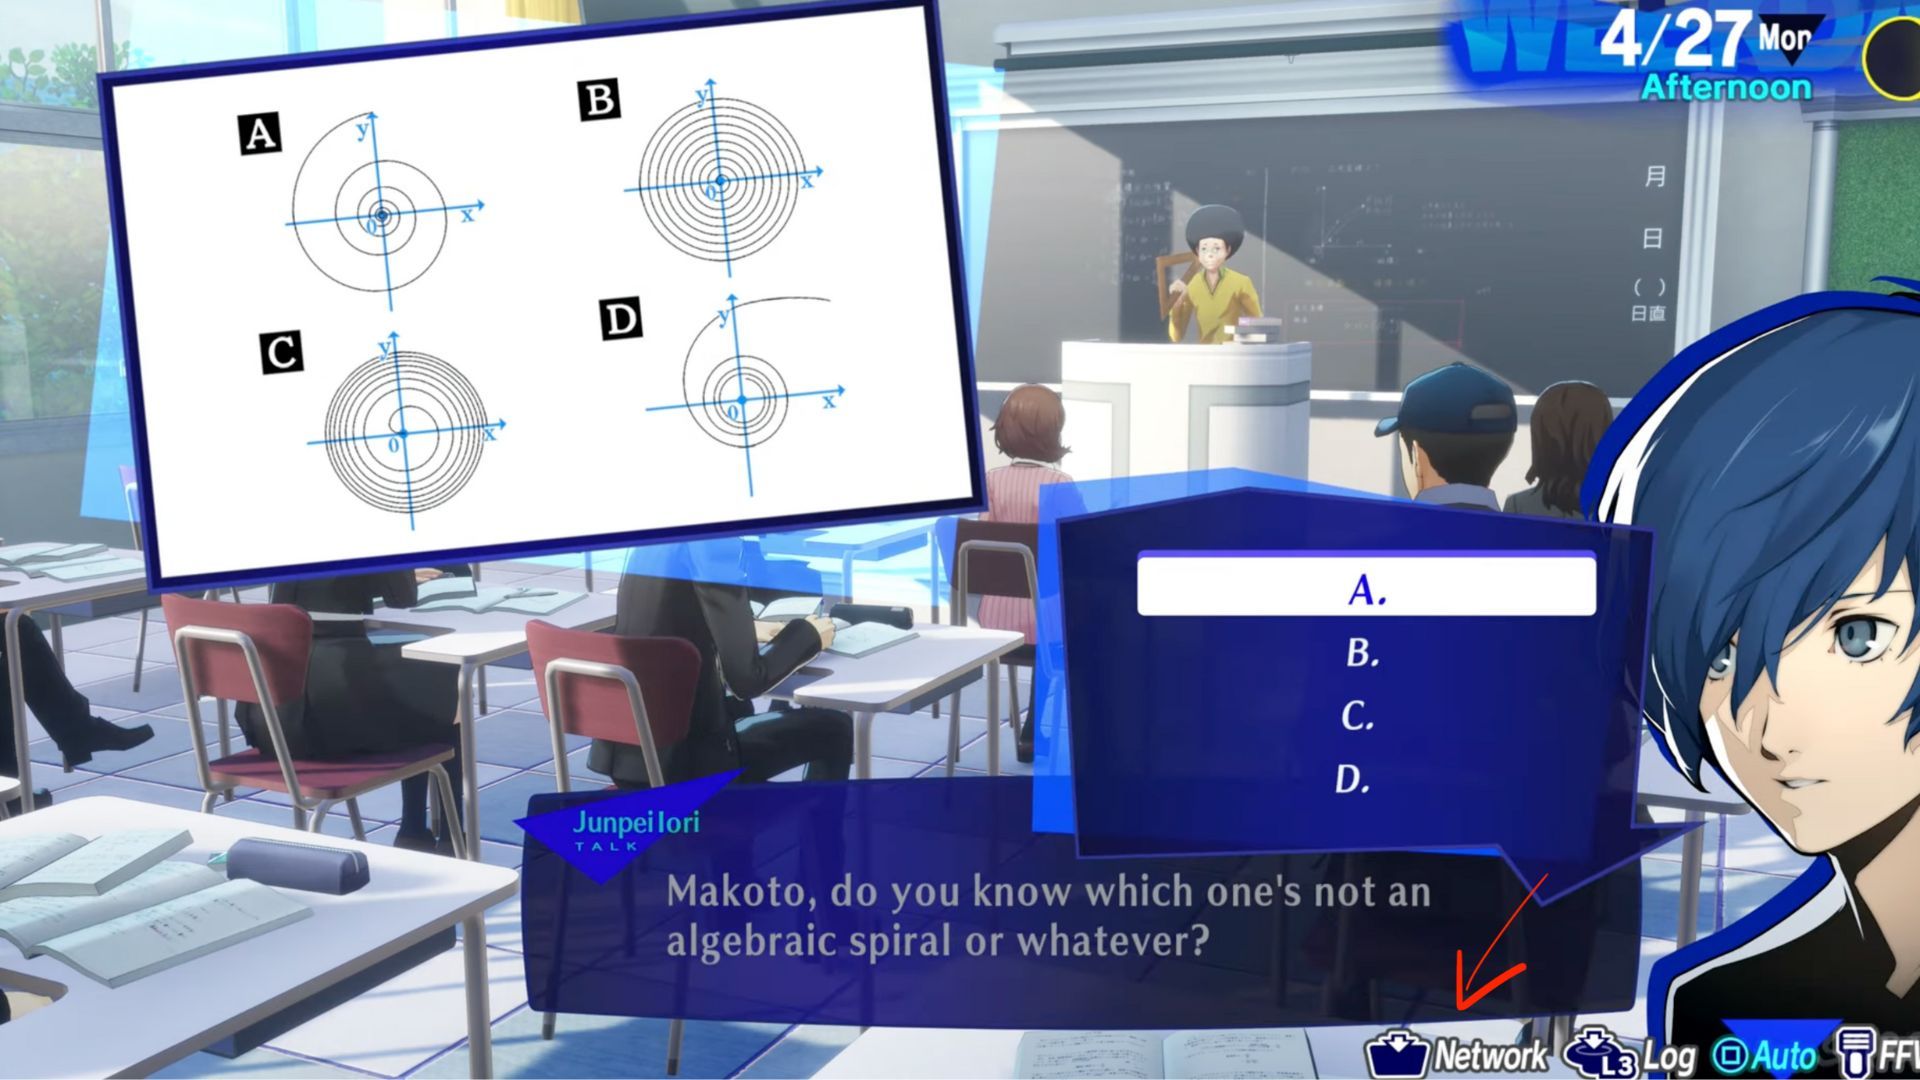 Persona 3: How Did the Witch of Agnesi Gain the First Half of Its Name